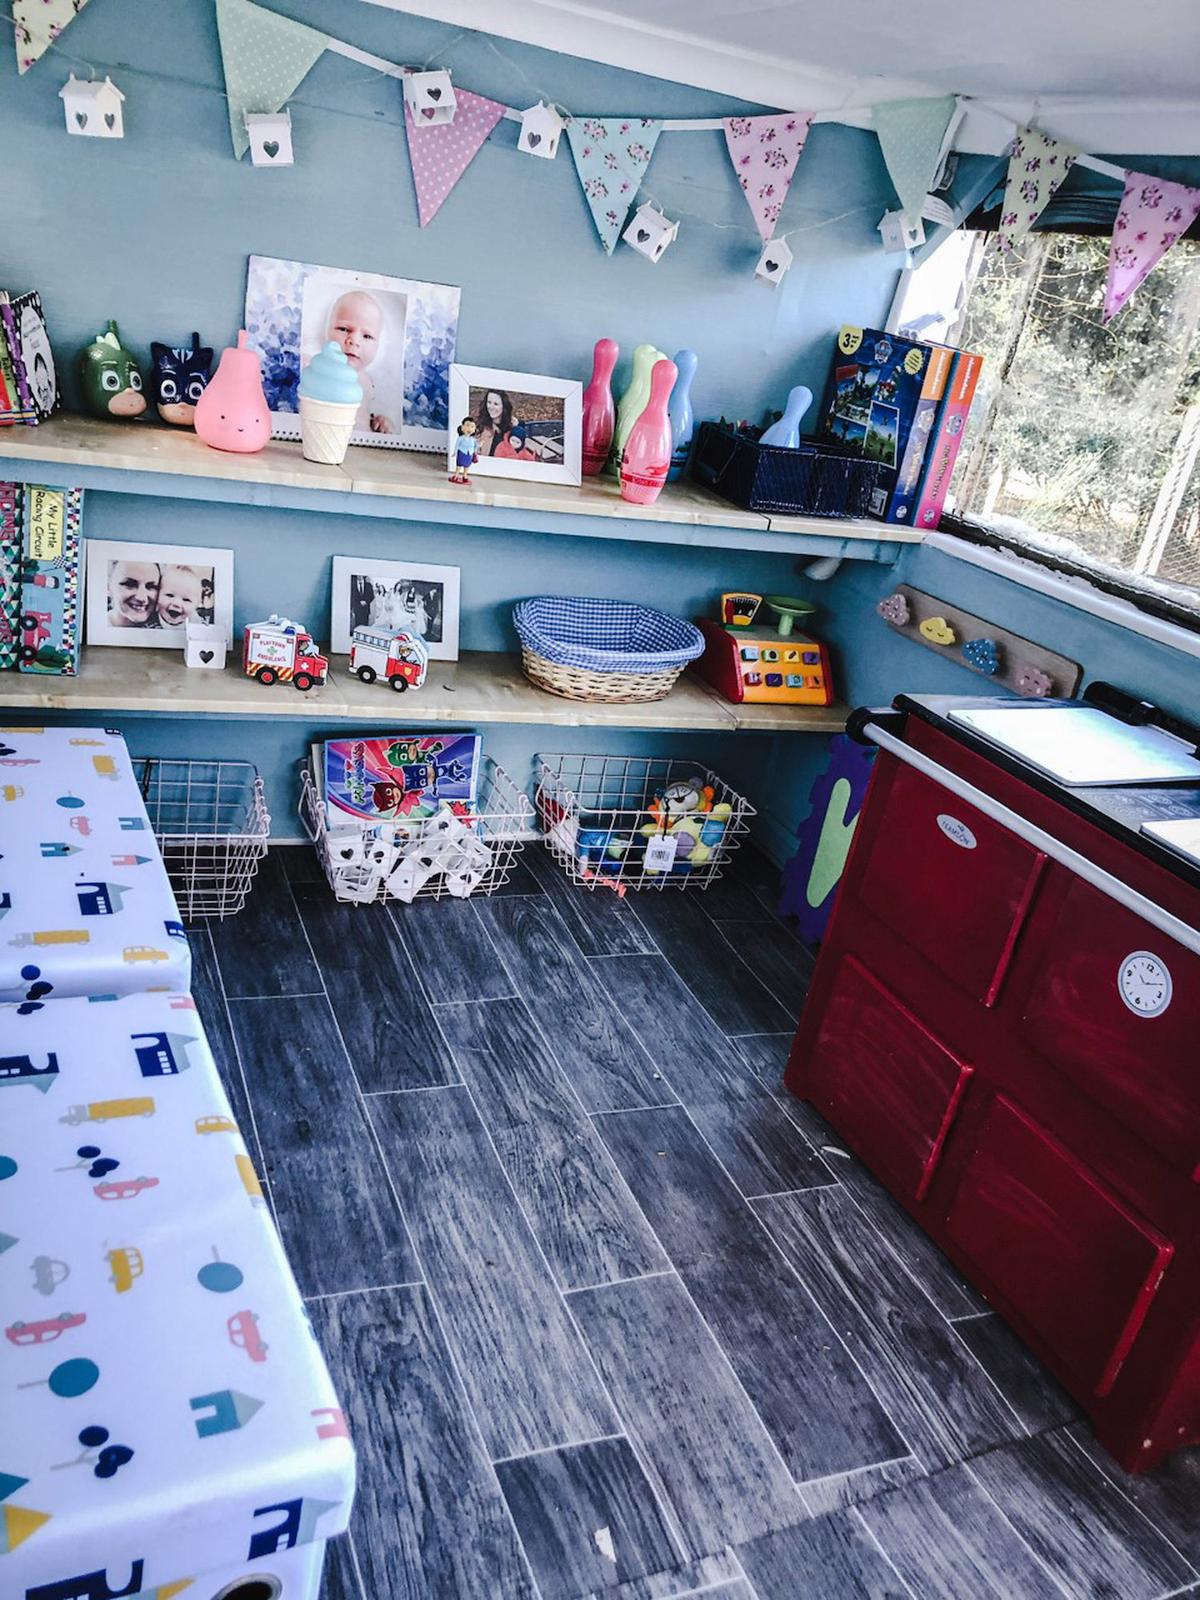 The kitchen of the playhouse that Gemma built for her kids. (Courtesy of Caters News)